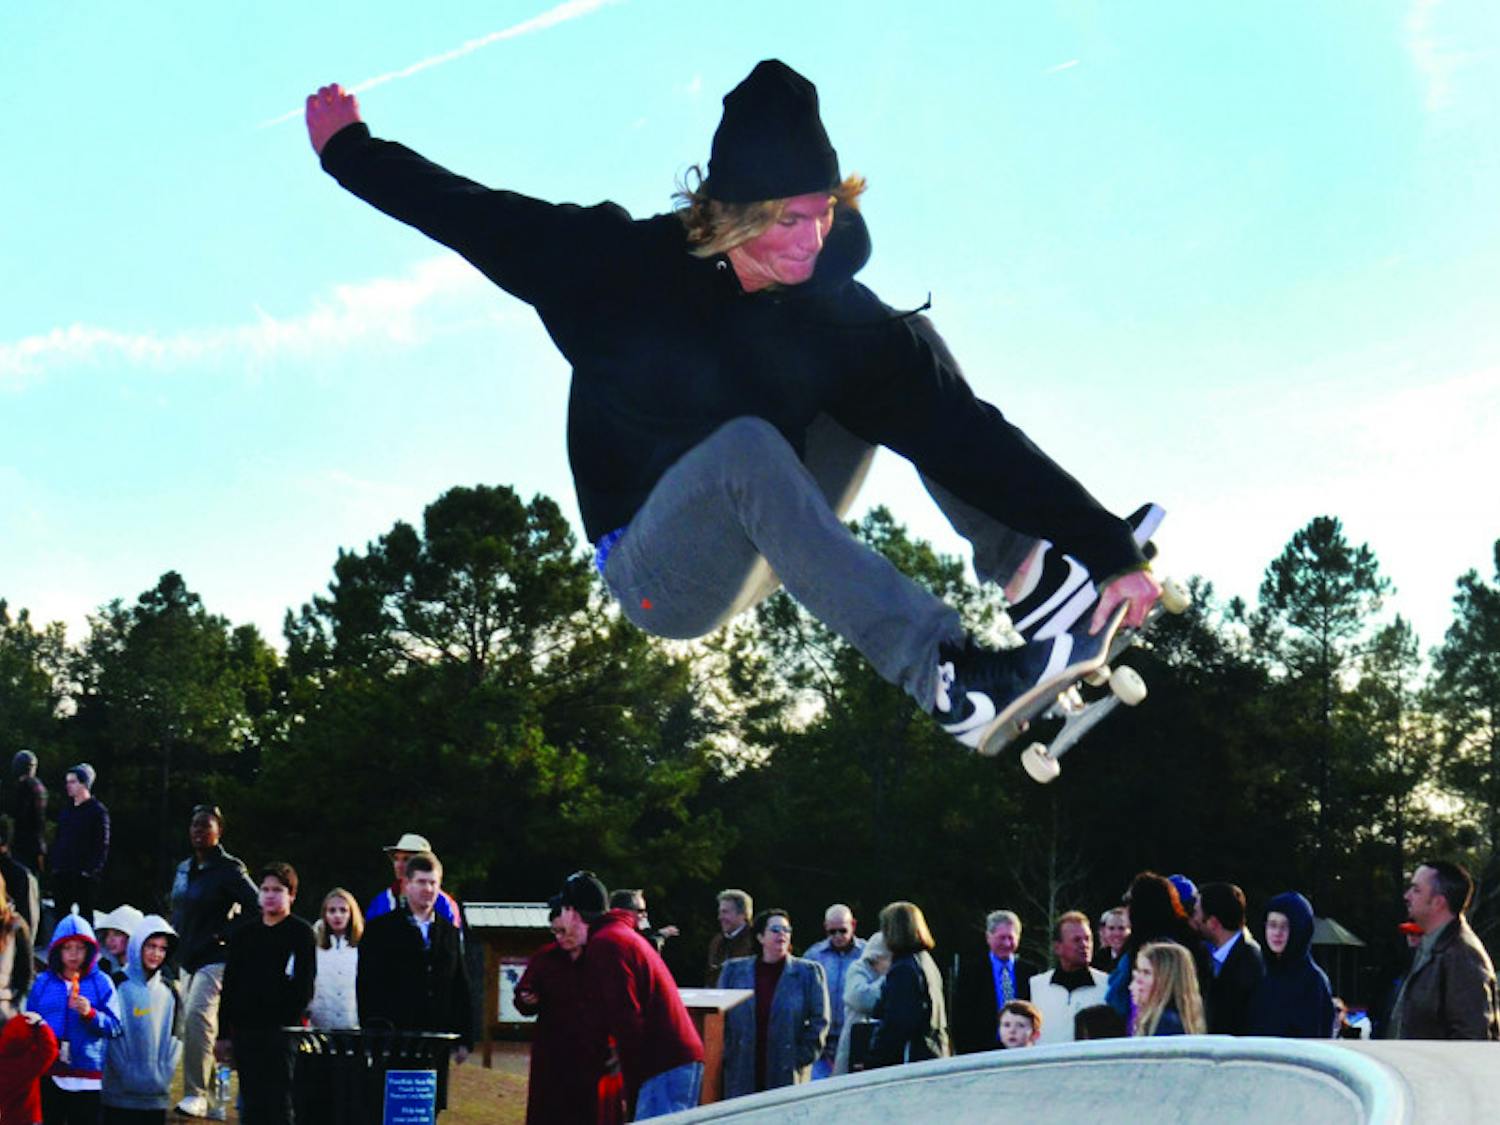 Aaron Devlin, a member of the Gator Longboard Club, performs a skateboarding trick at the new Possum Creek skatepark during the ribbon cutting ceremony Thursday.